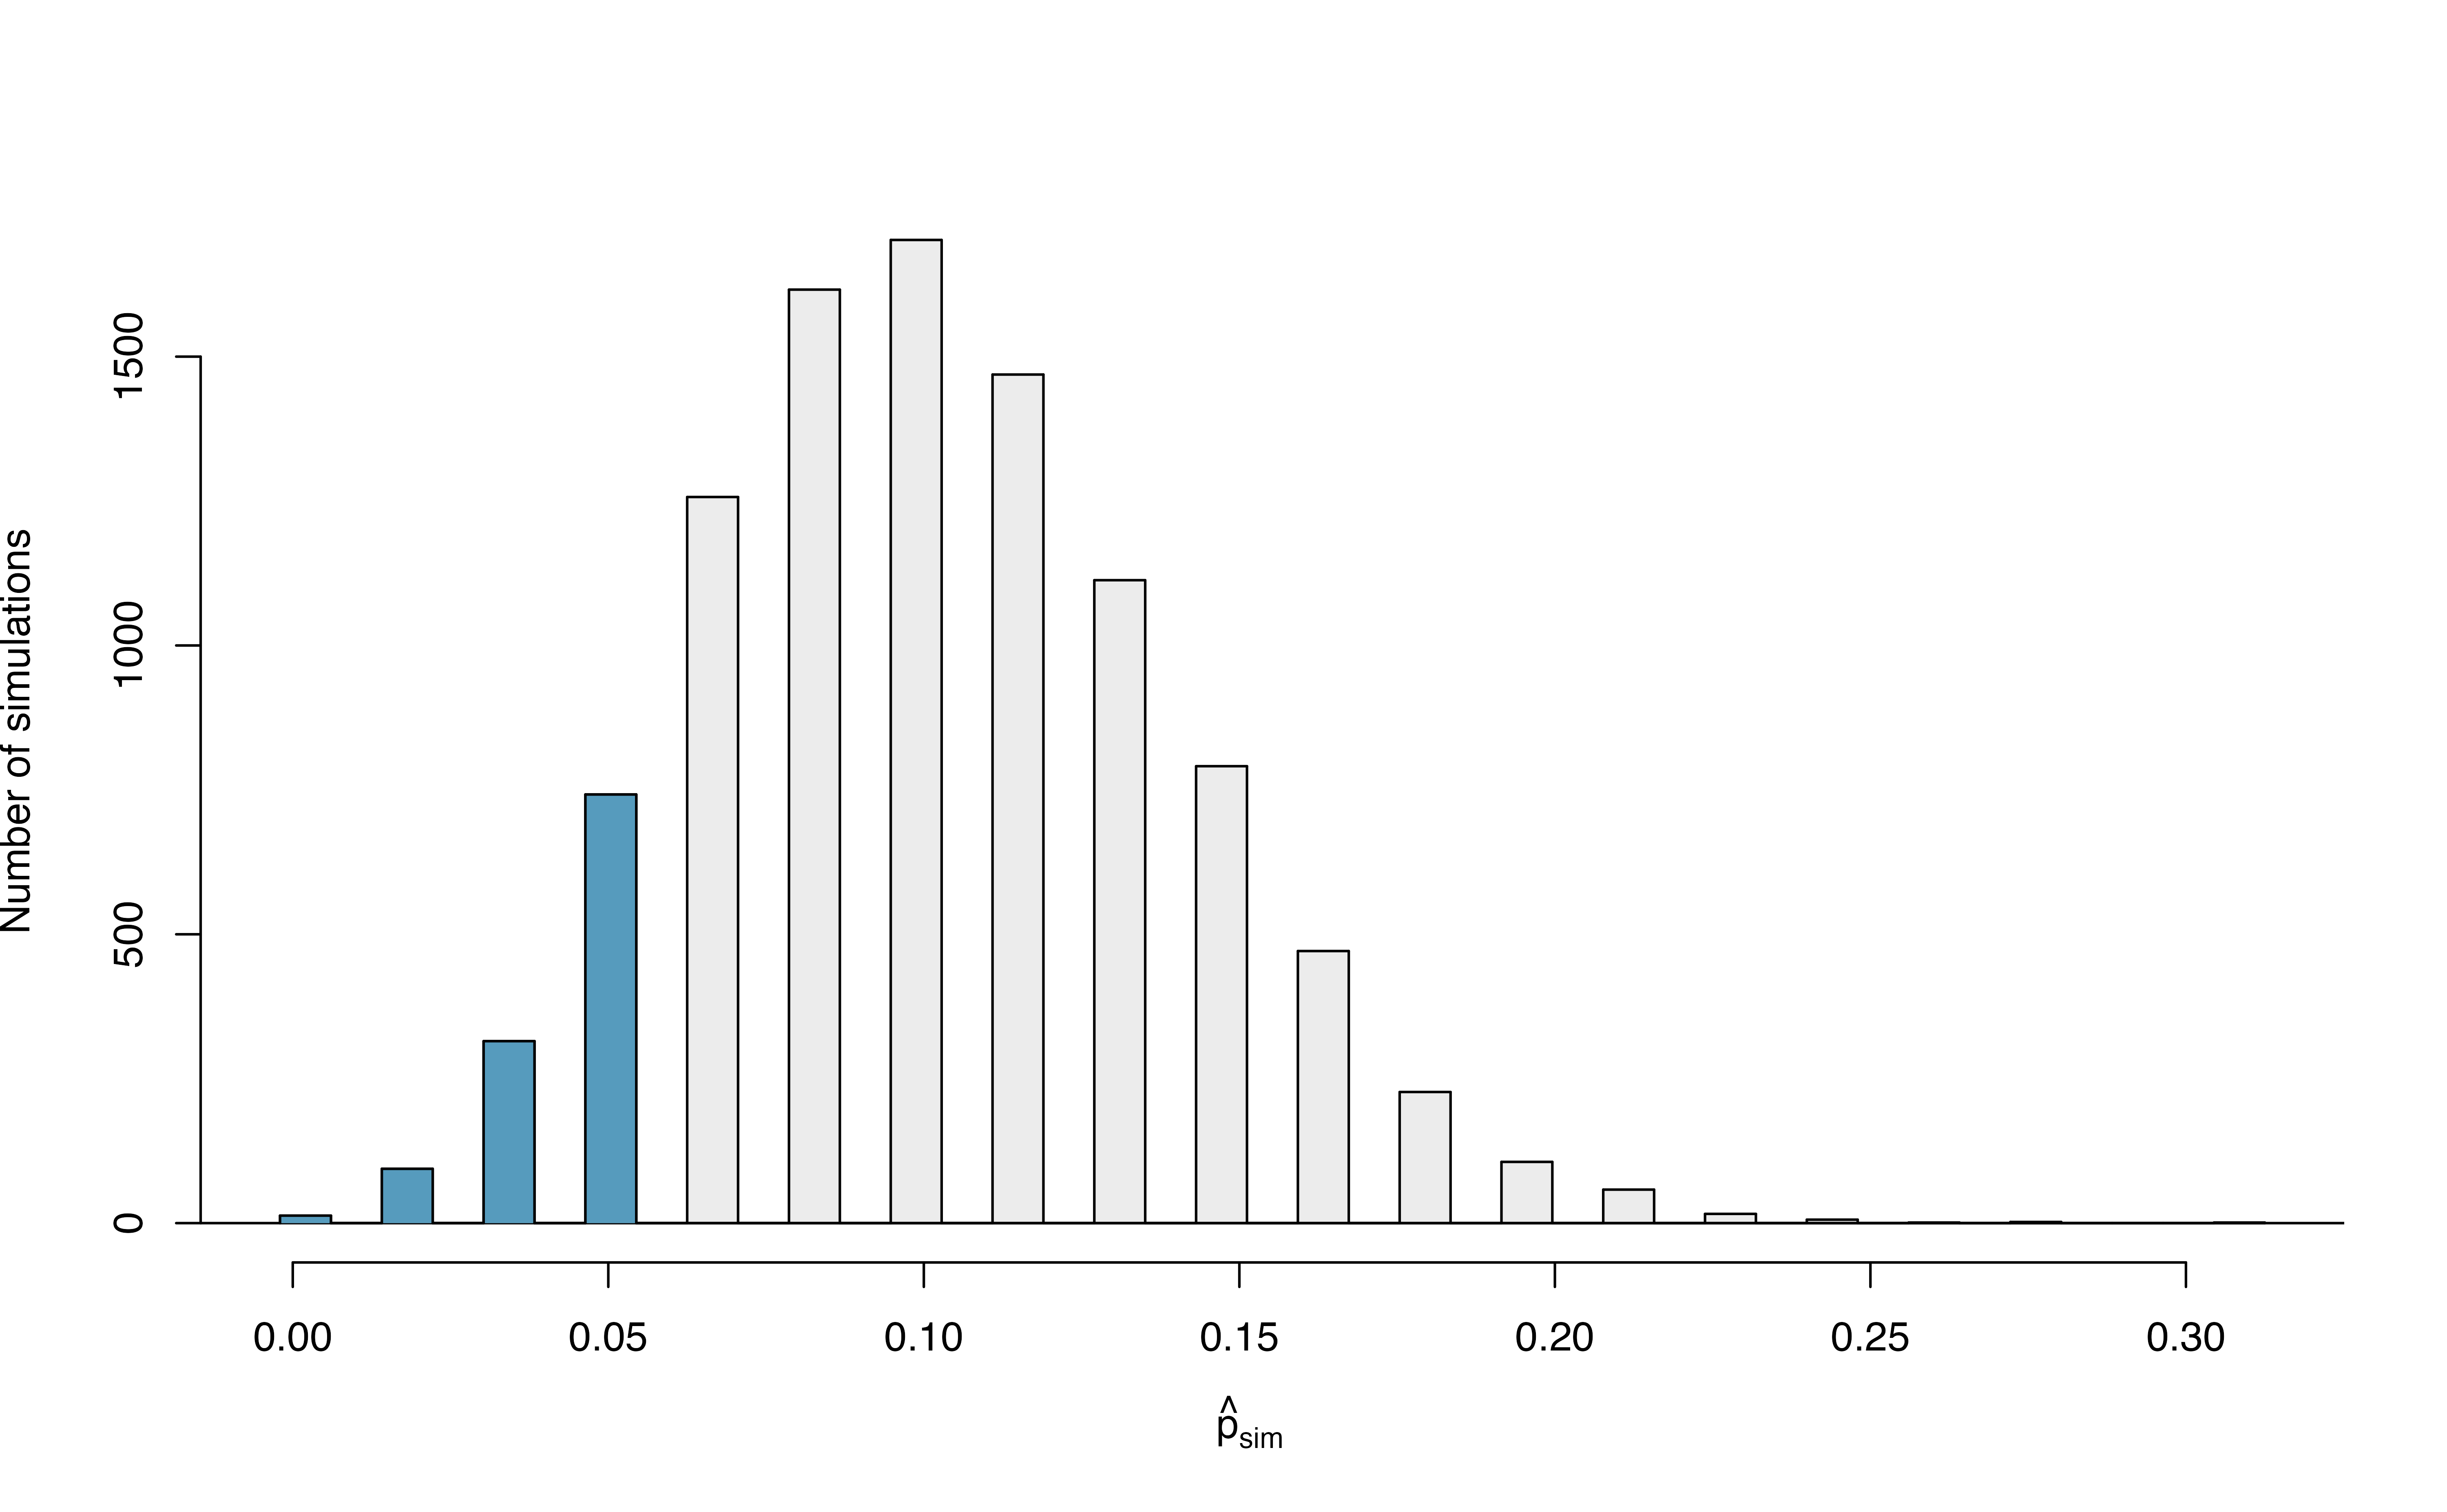 The null distribution for $\hat{p}$, created from 10,000 simulated studies. The left tail, representing the p-value for the hypothesis test, contains 12.22% of the simulations.